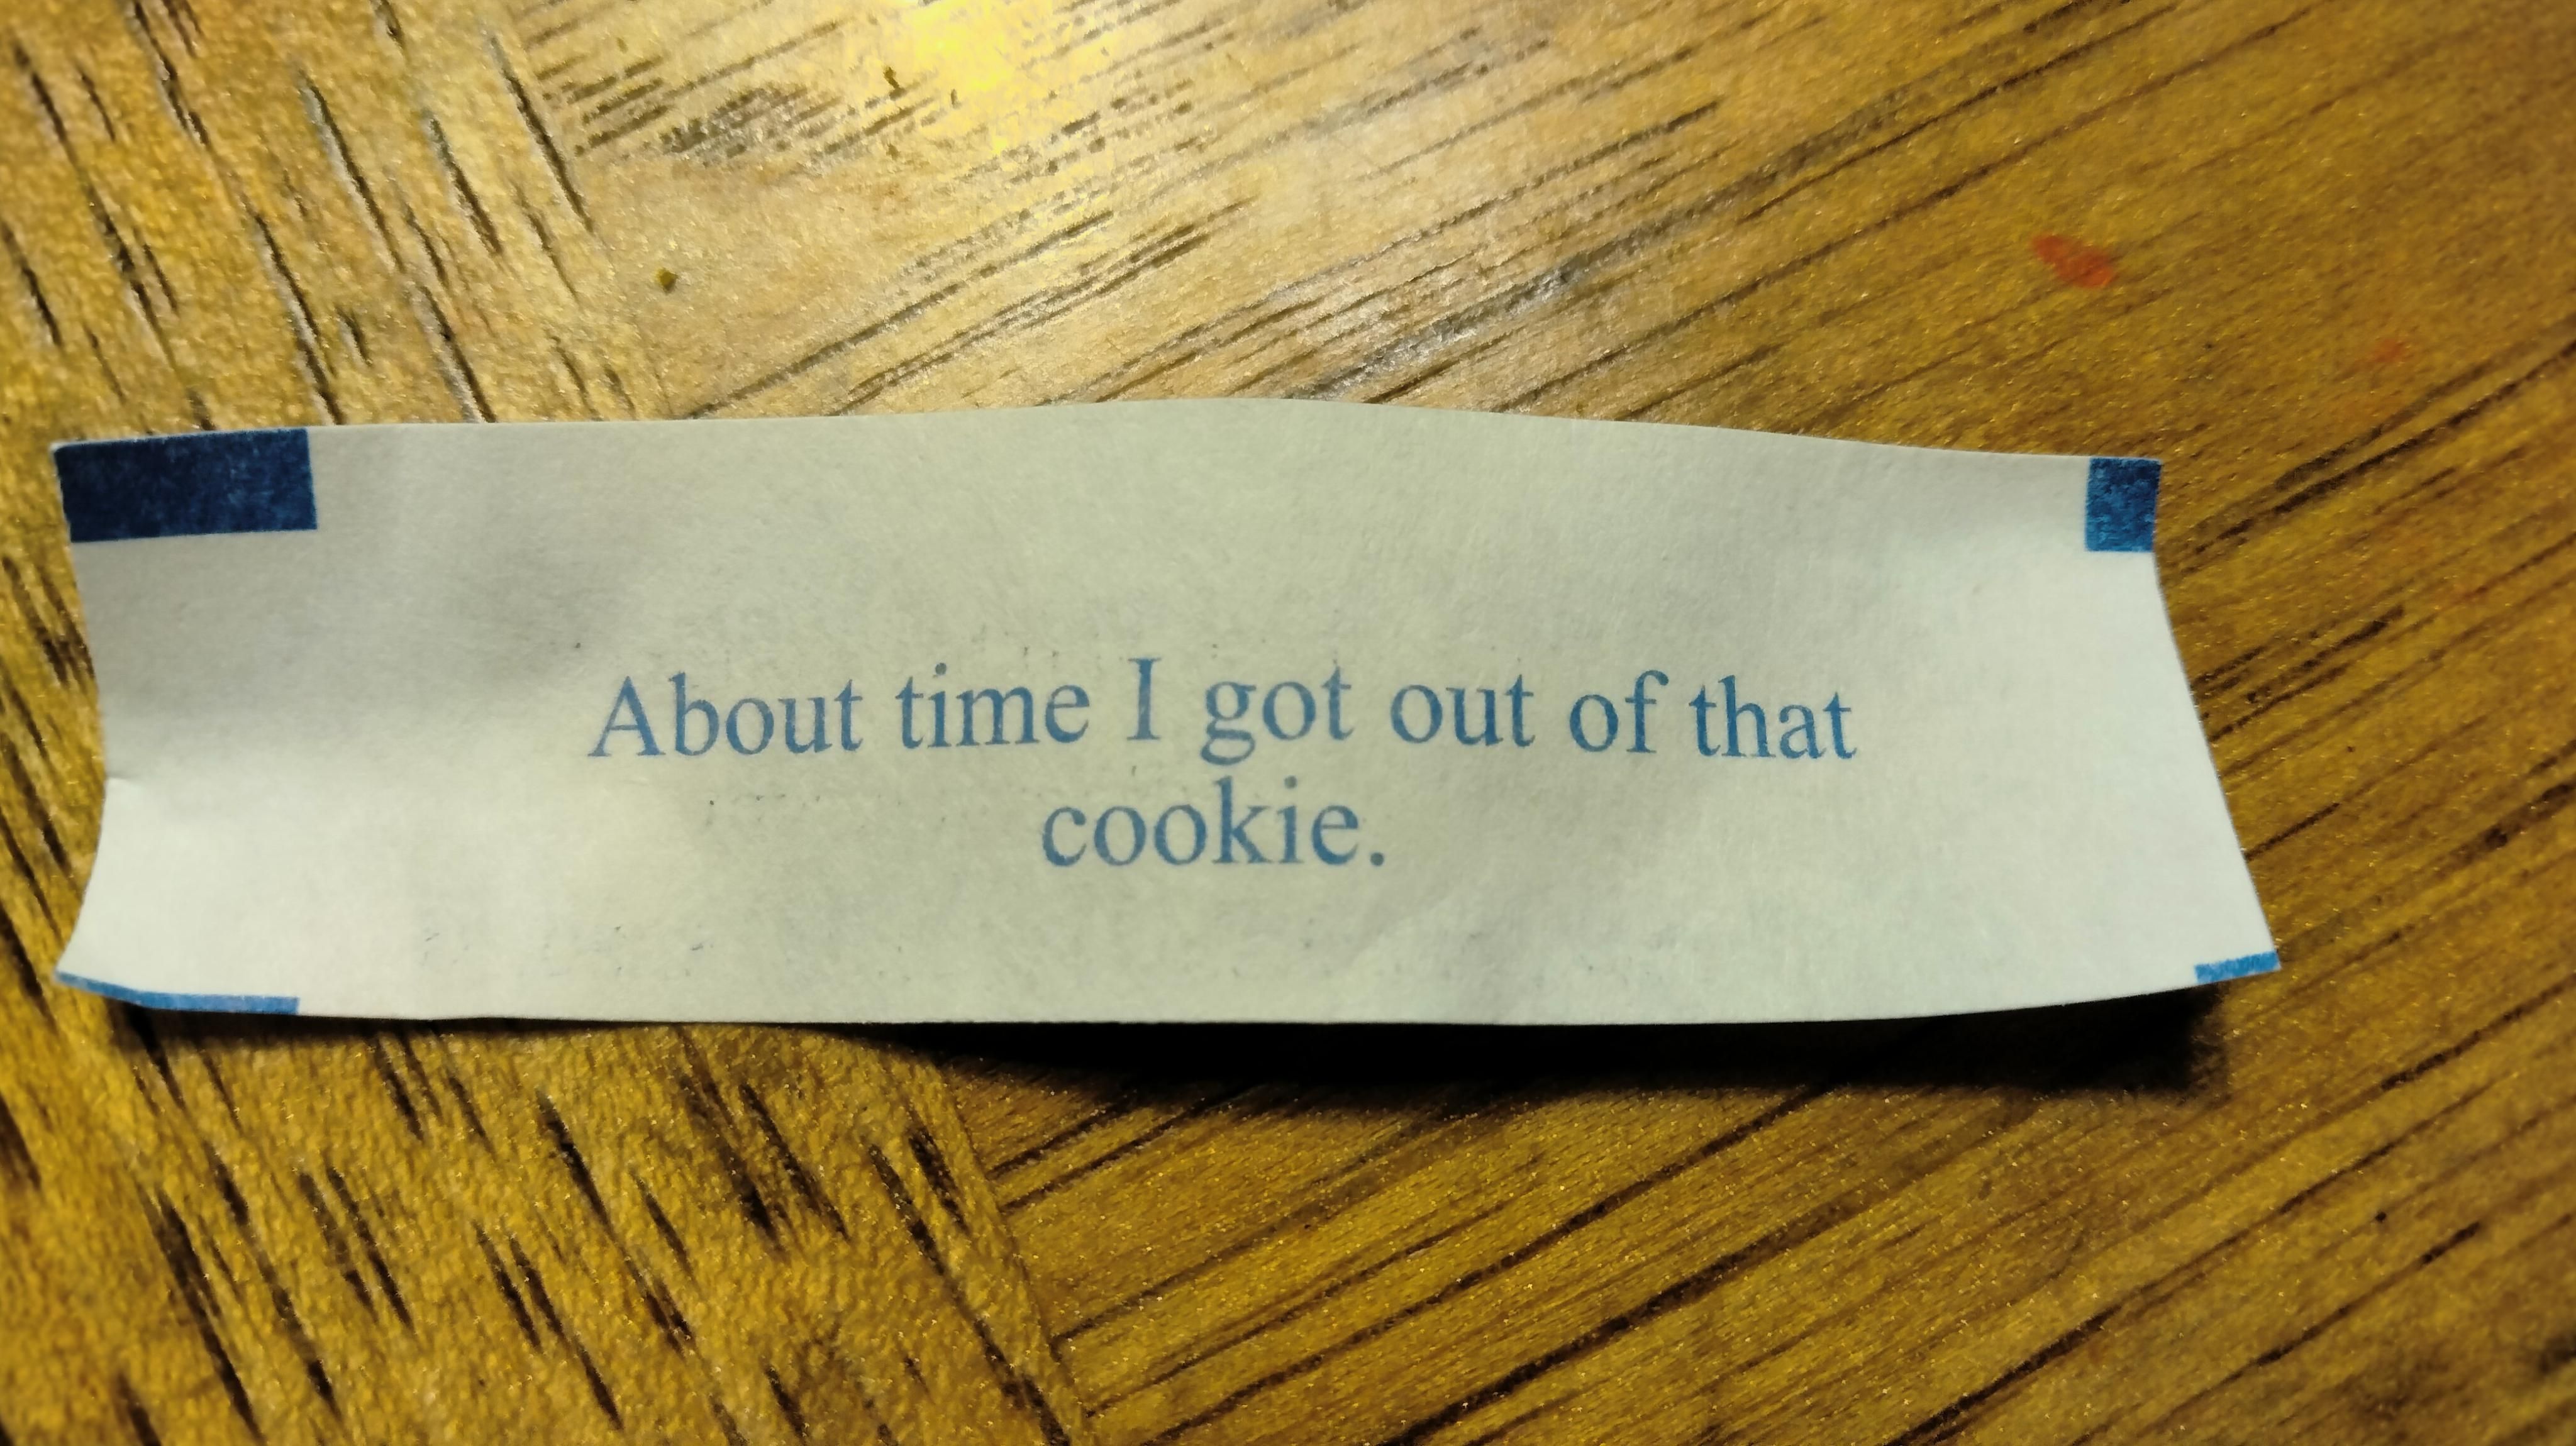 My fortune today.